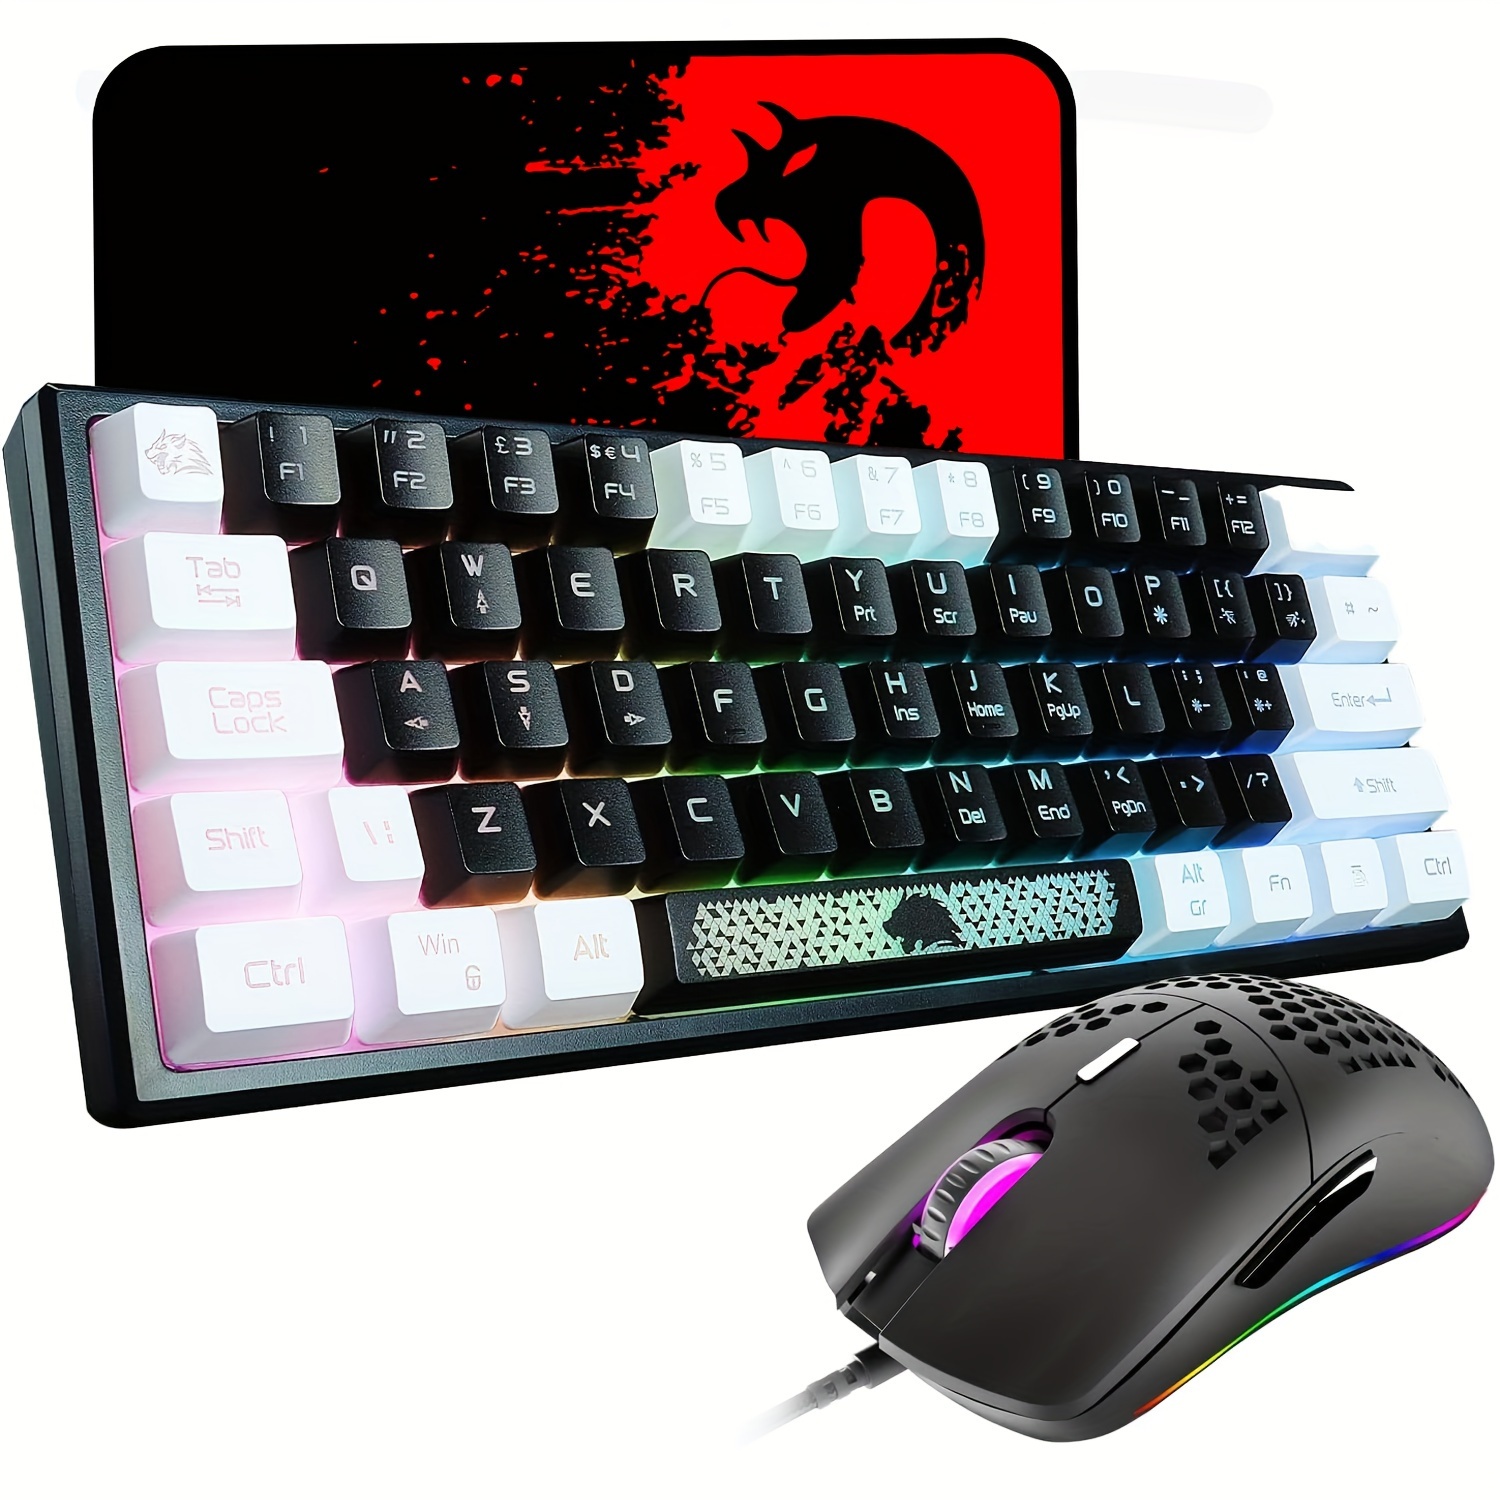 60% Gaming Keyboard and Mouse Wired RGB Backlit Mechanical